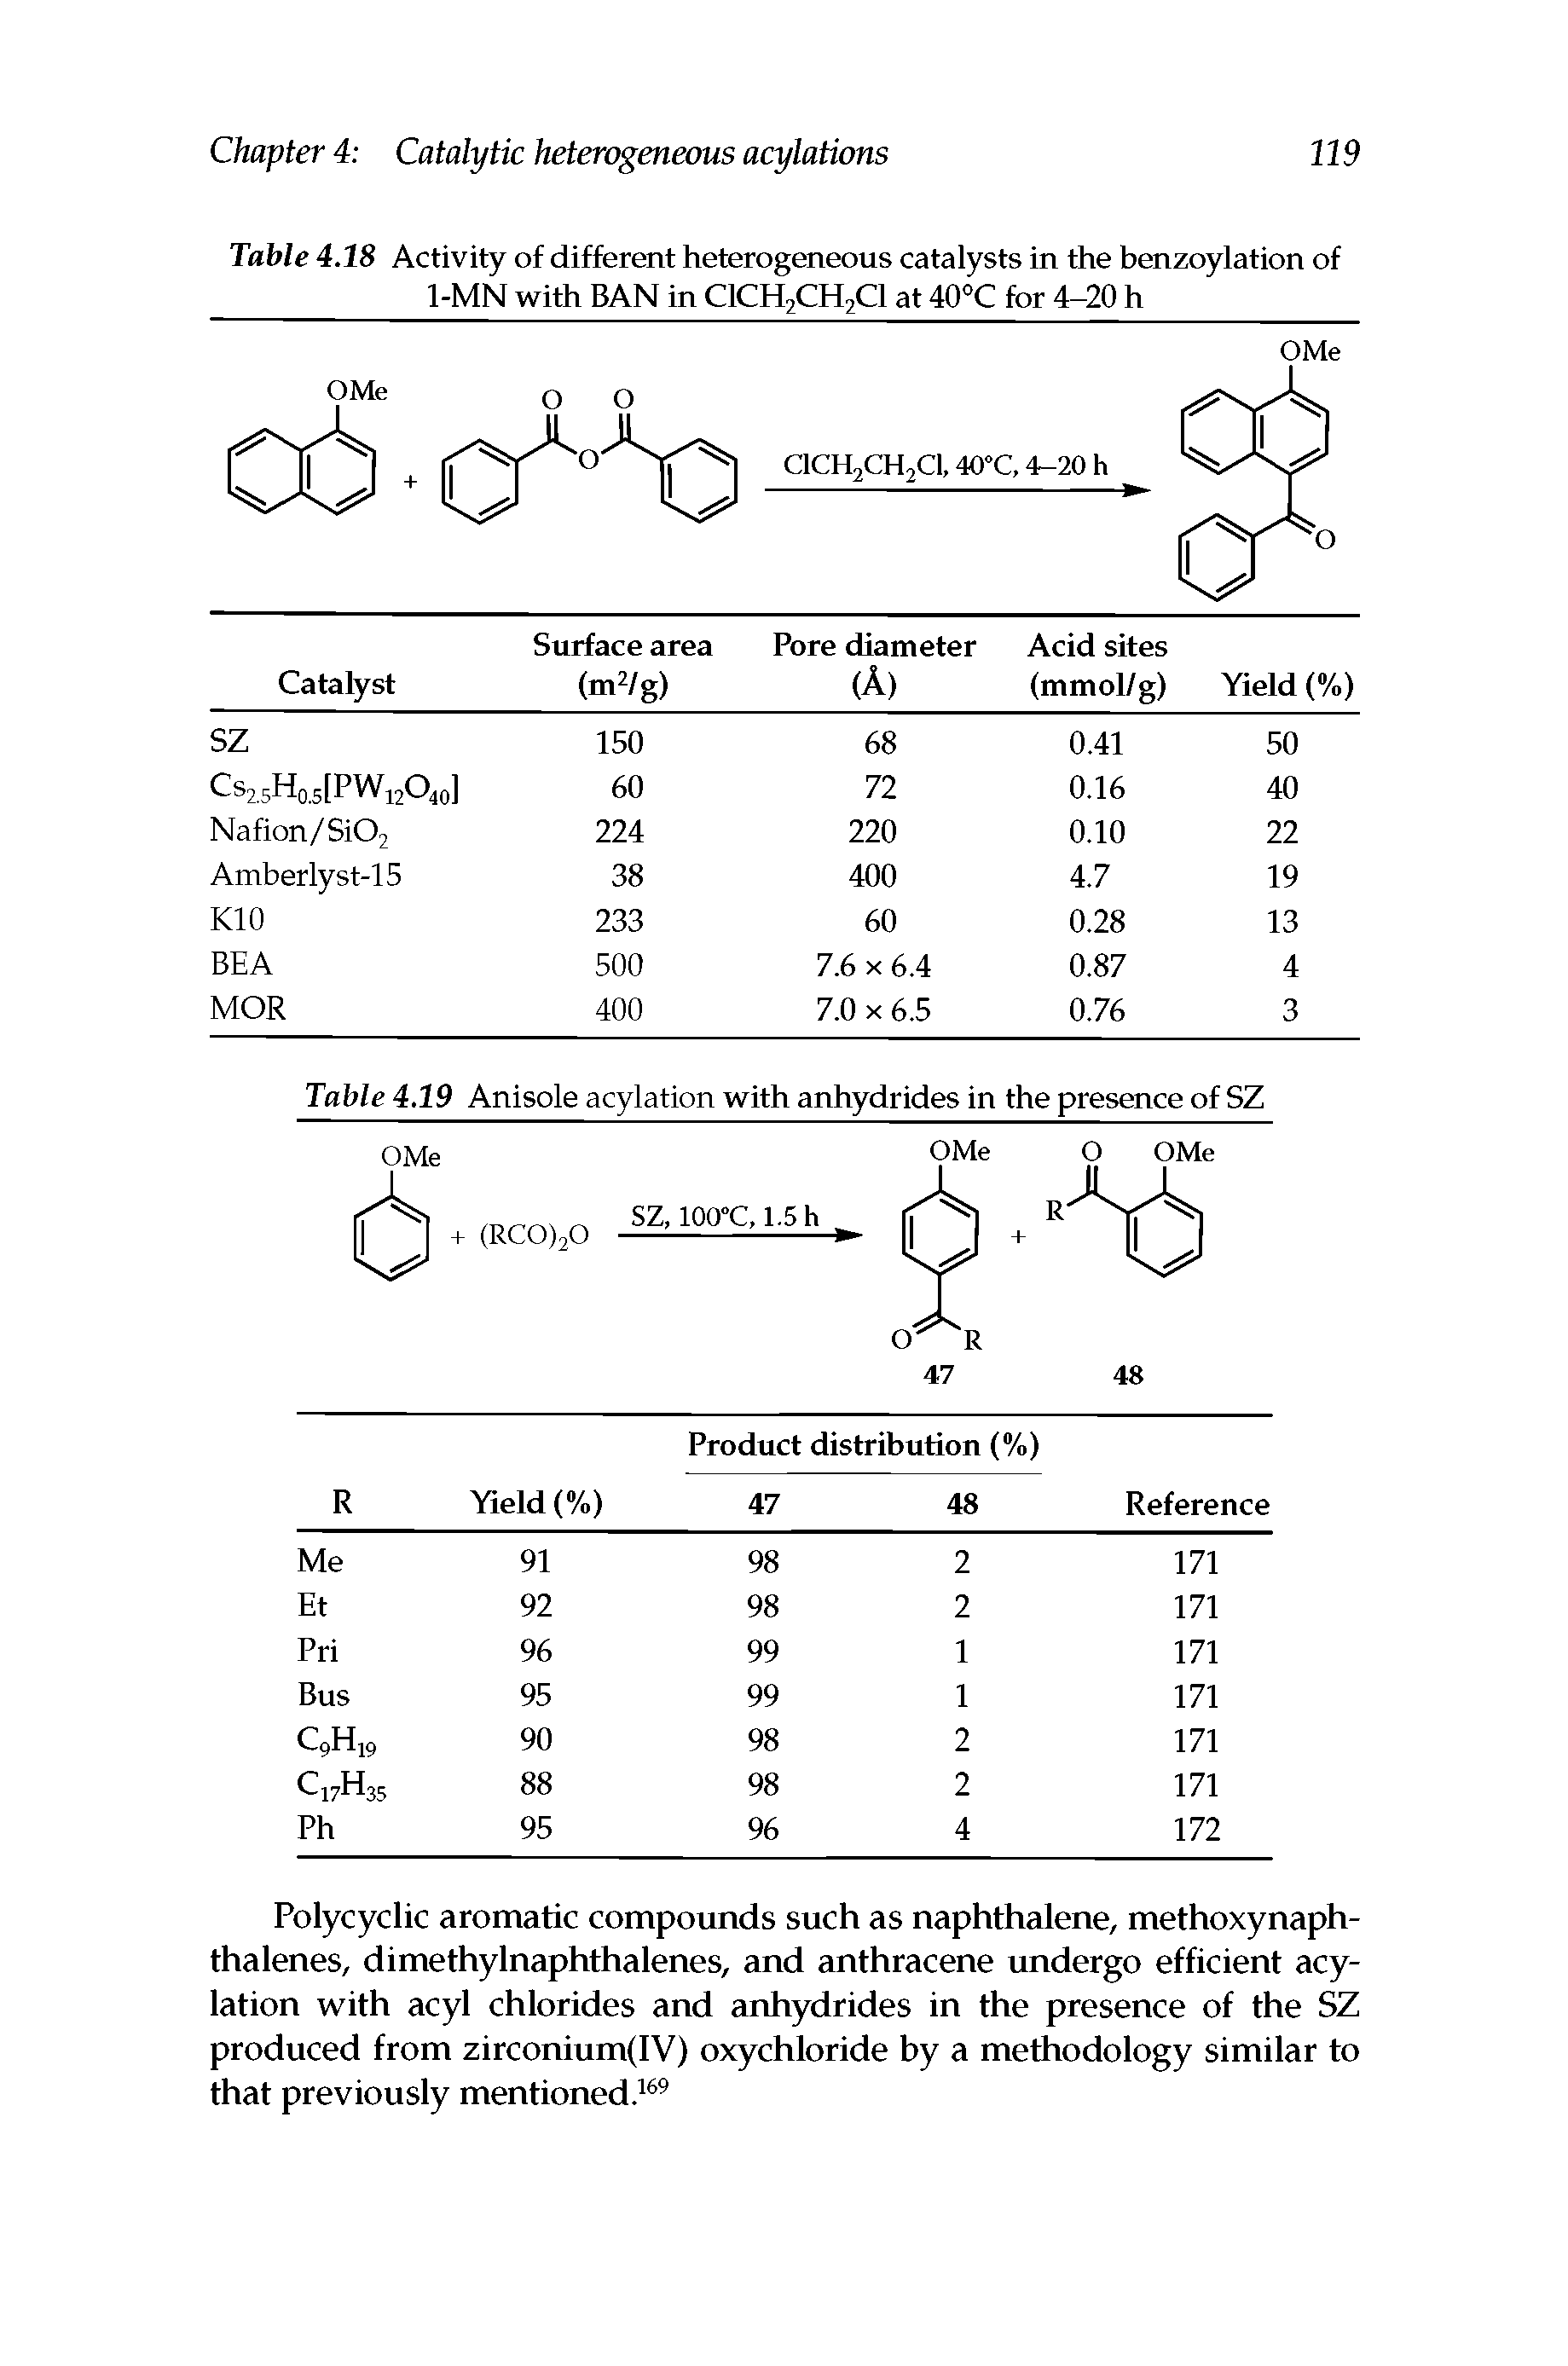 Table 4.19 Anisole acylation with anhydrides in the presence of SZ...